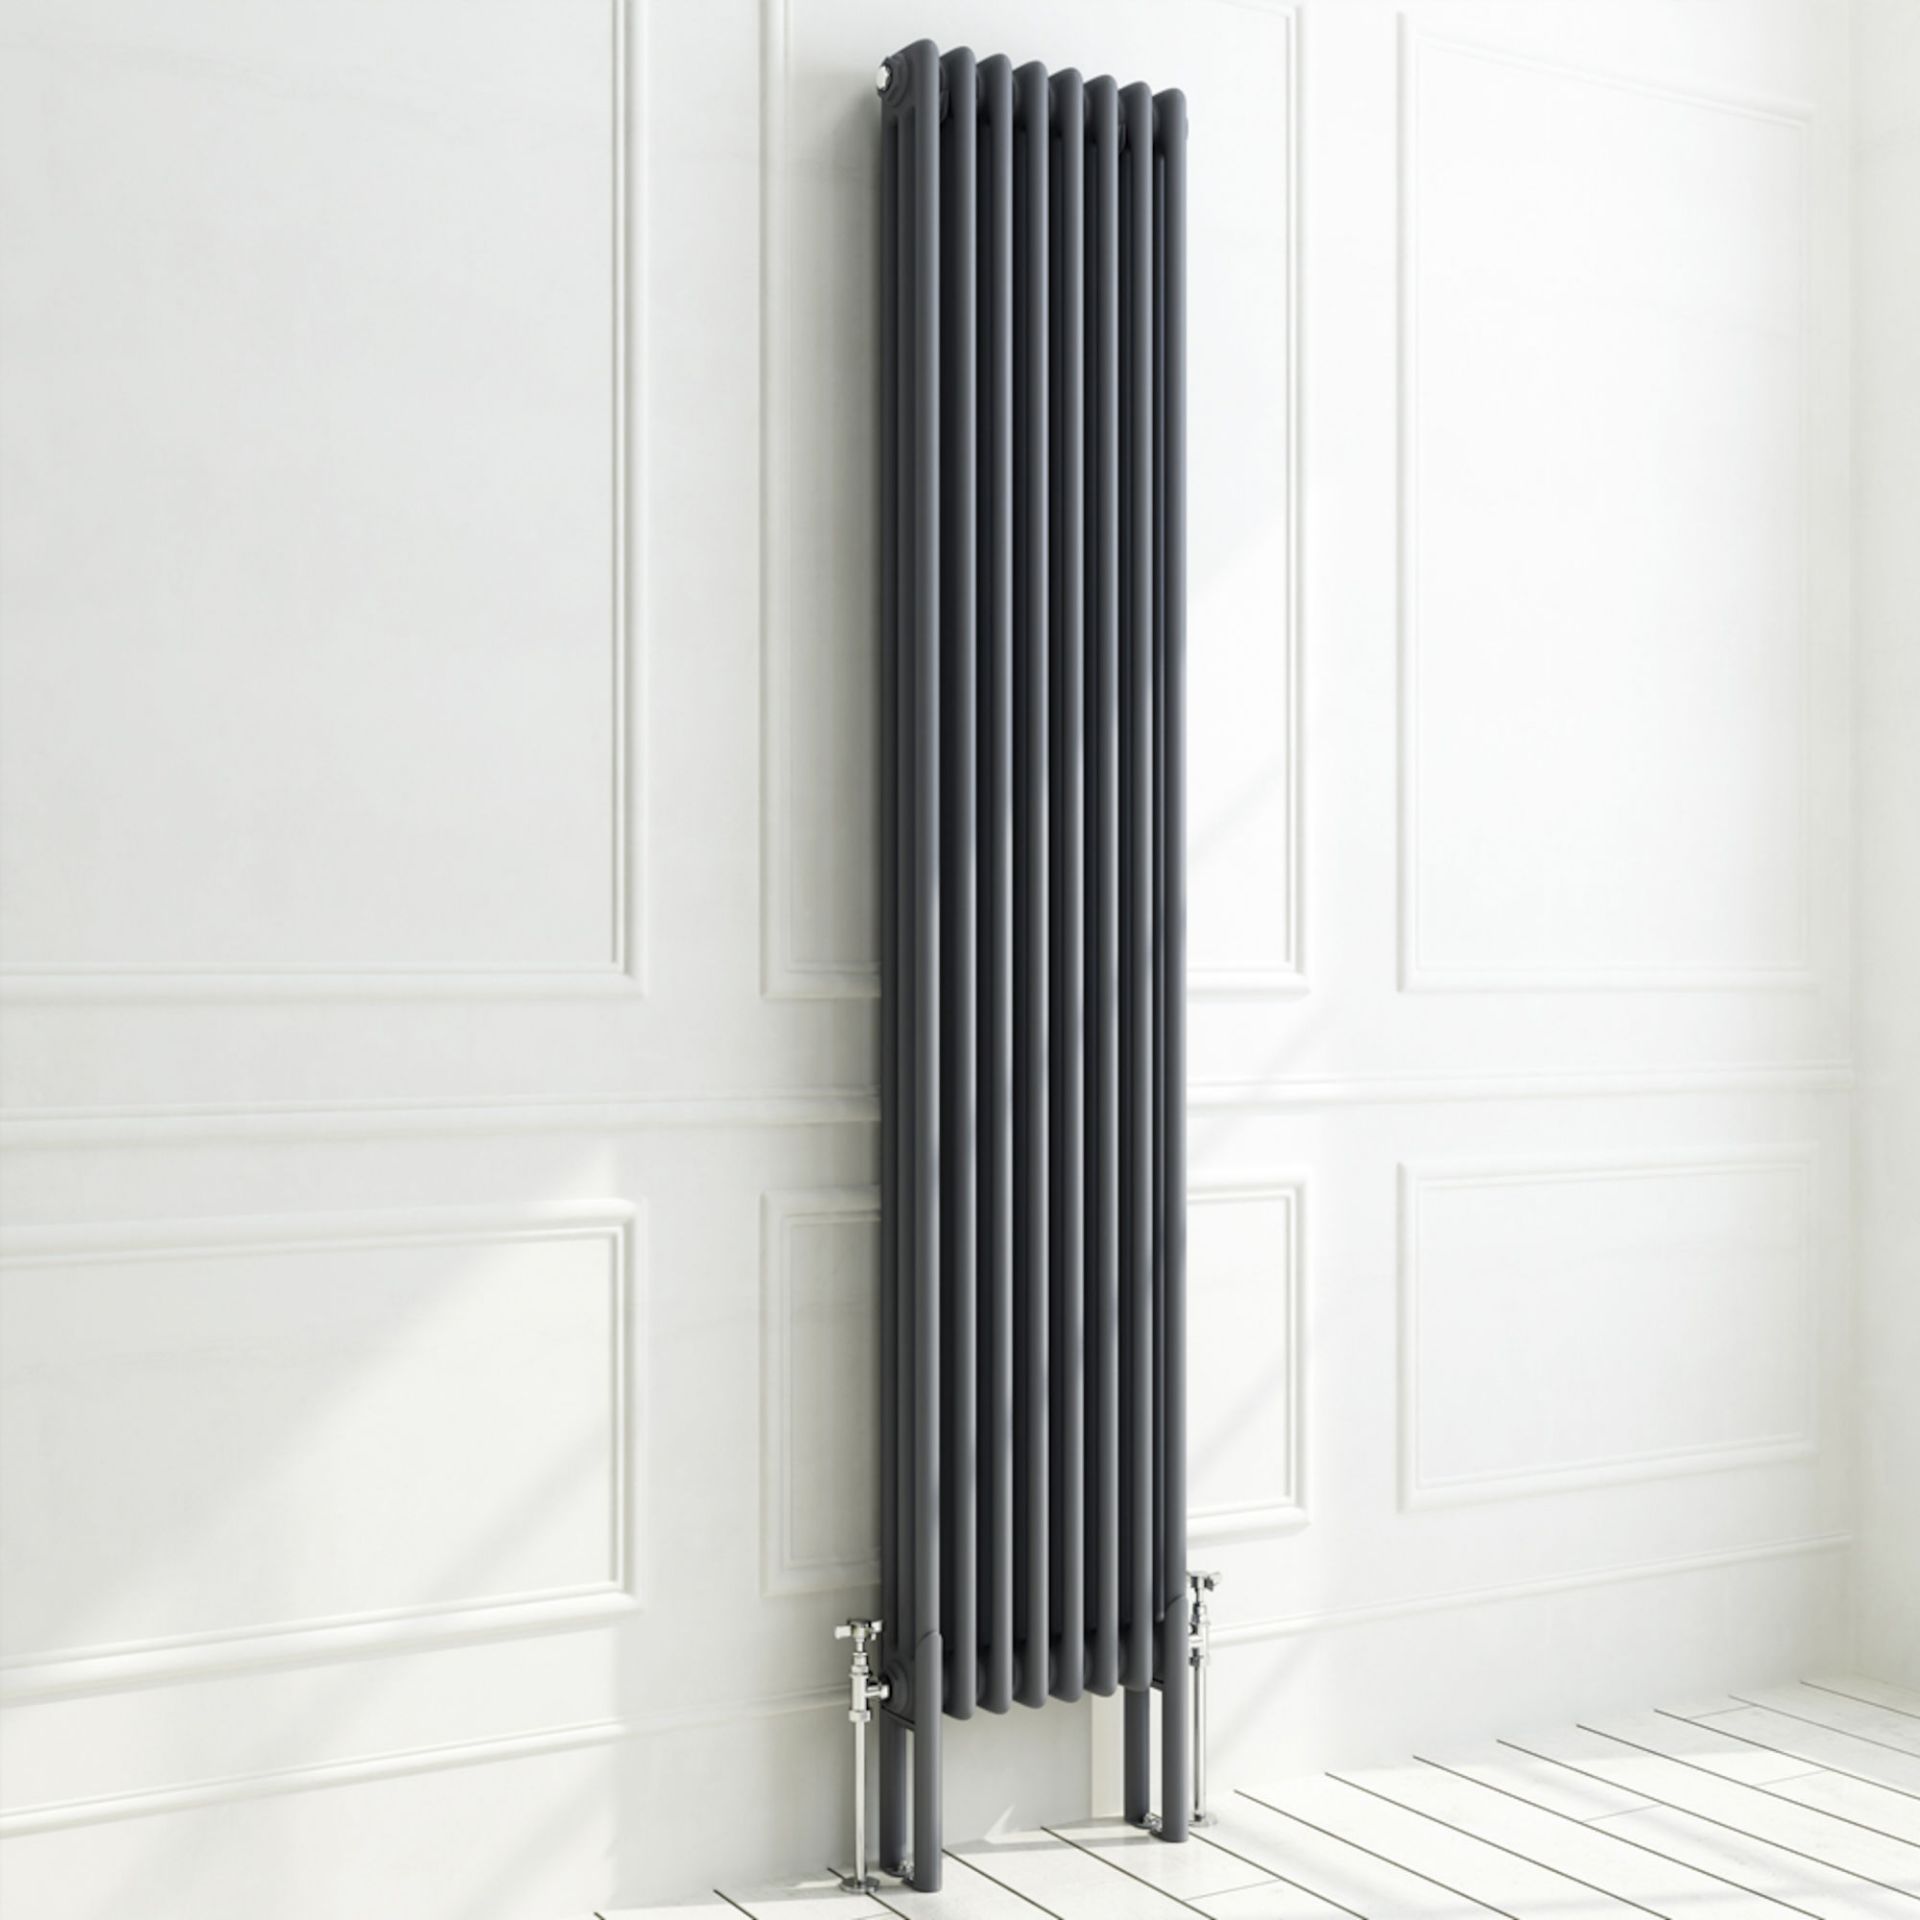 (DK64) 1800x380mm Anthracite Triple Panel Vertical Colosseum Traditional Radiator. RRP £429.99. Made - Image 2 of 4